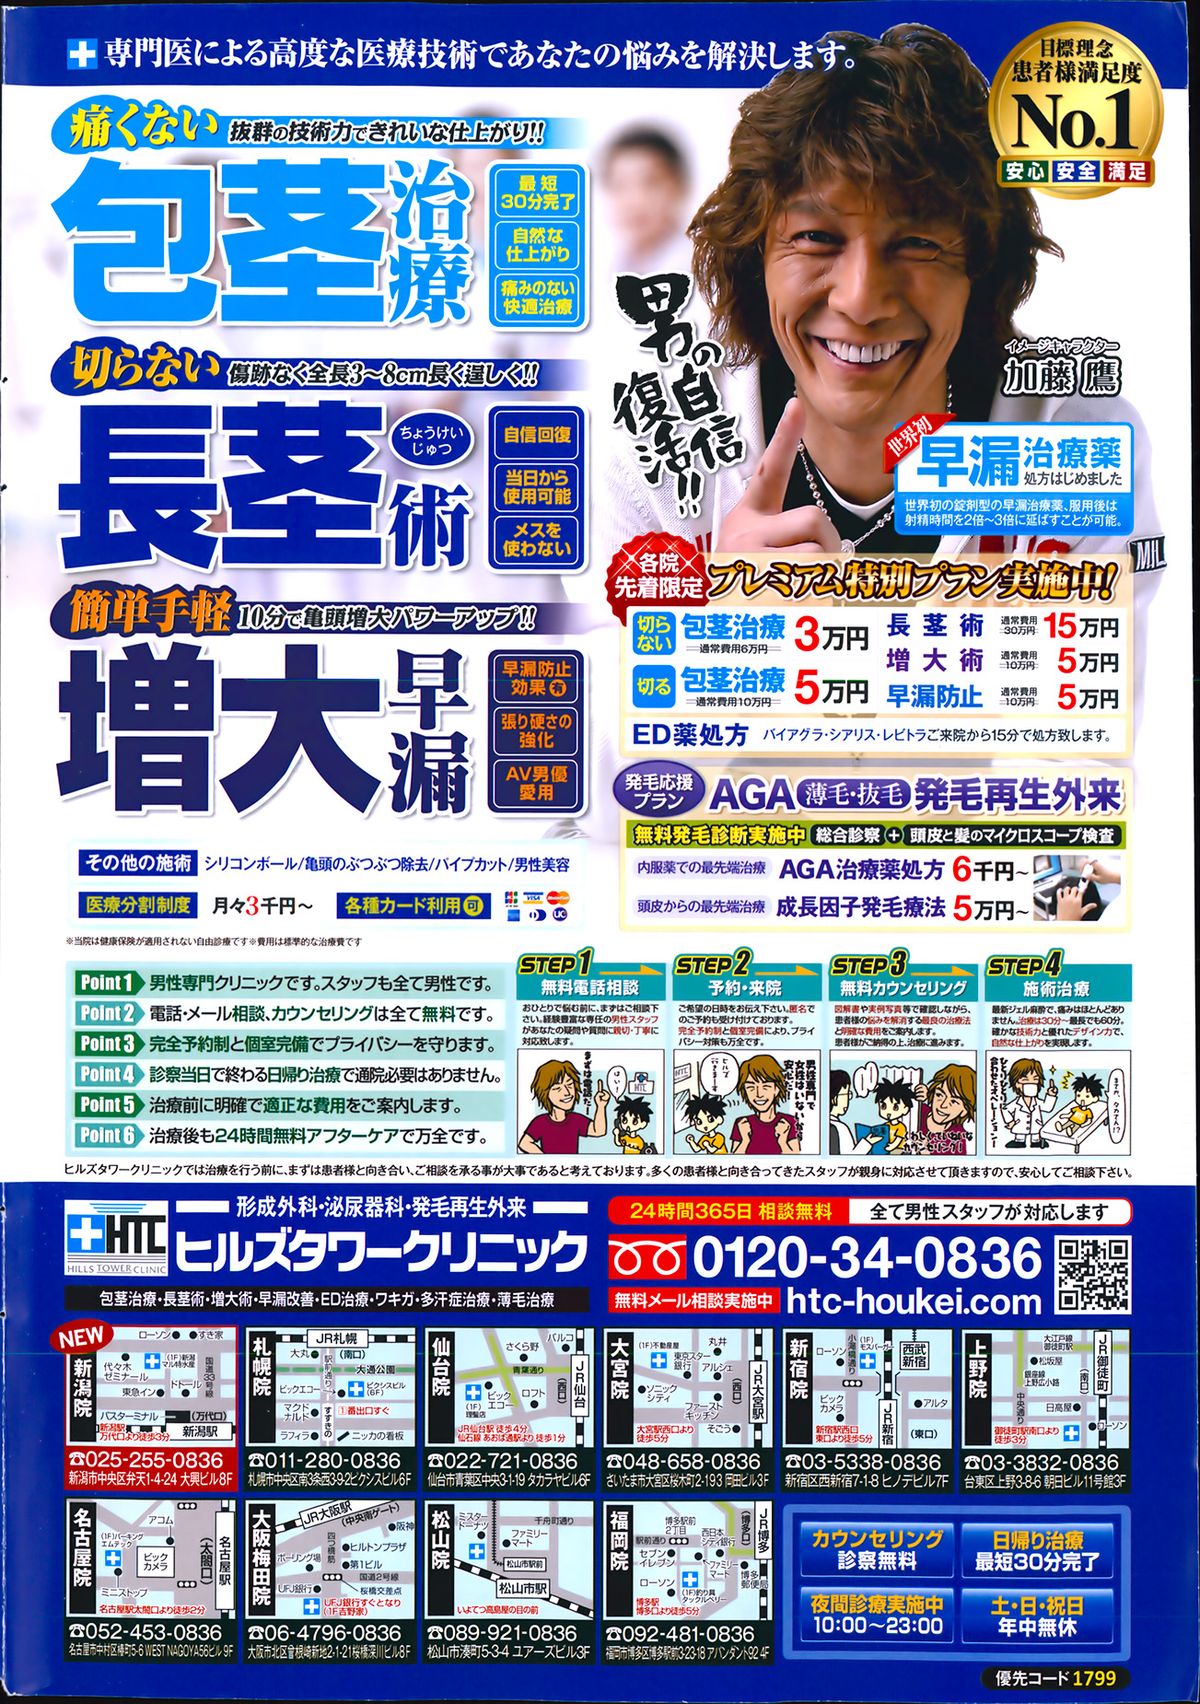 Monthly Vitaman 2014-04 page 2 full